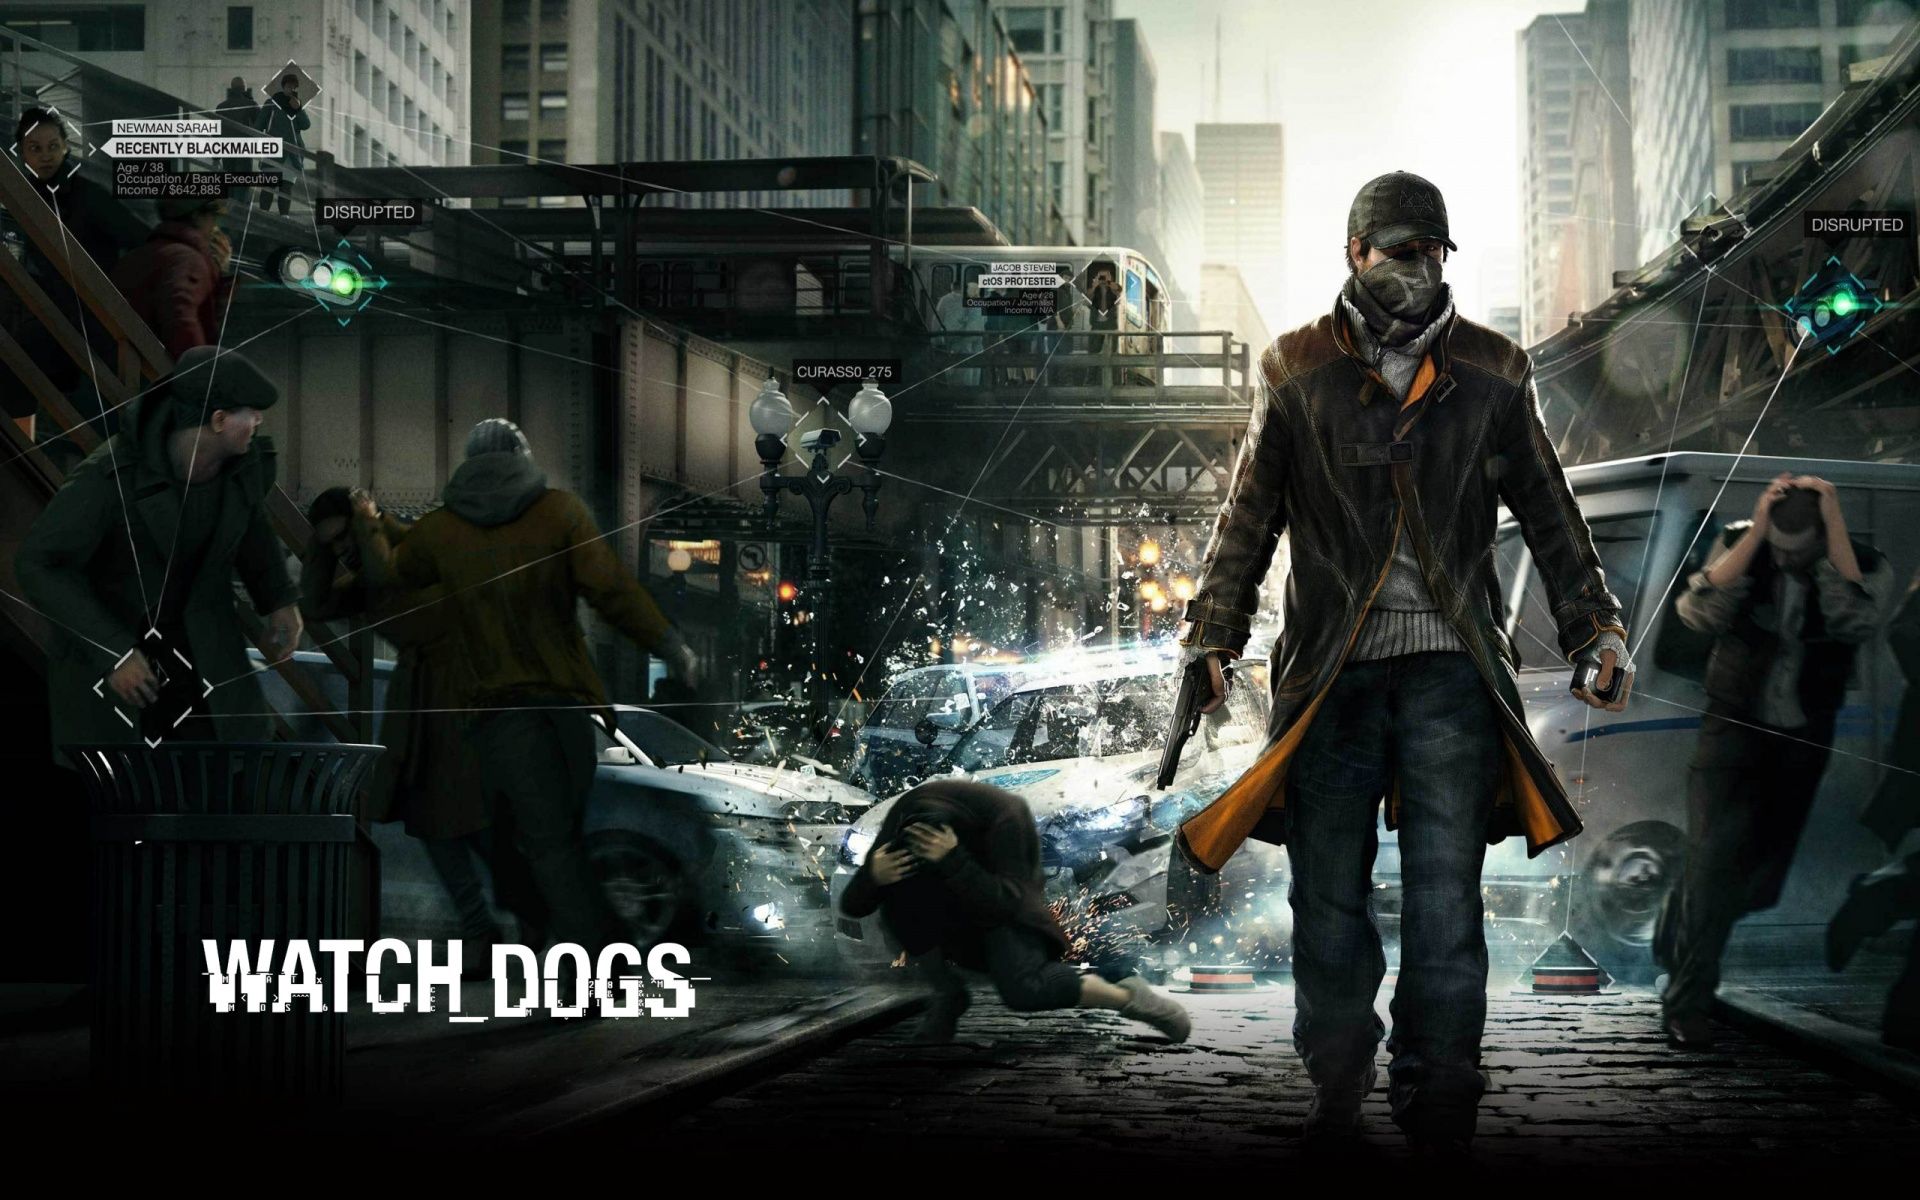 Watch Dogs Wallpapers | HD Wallpapers